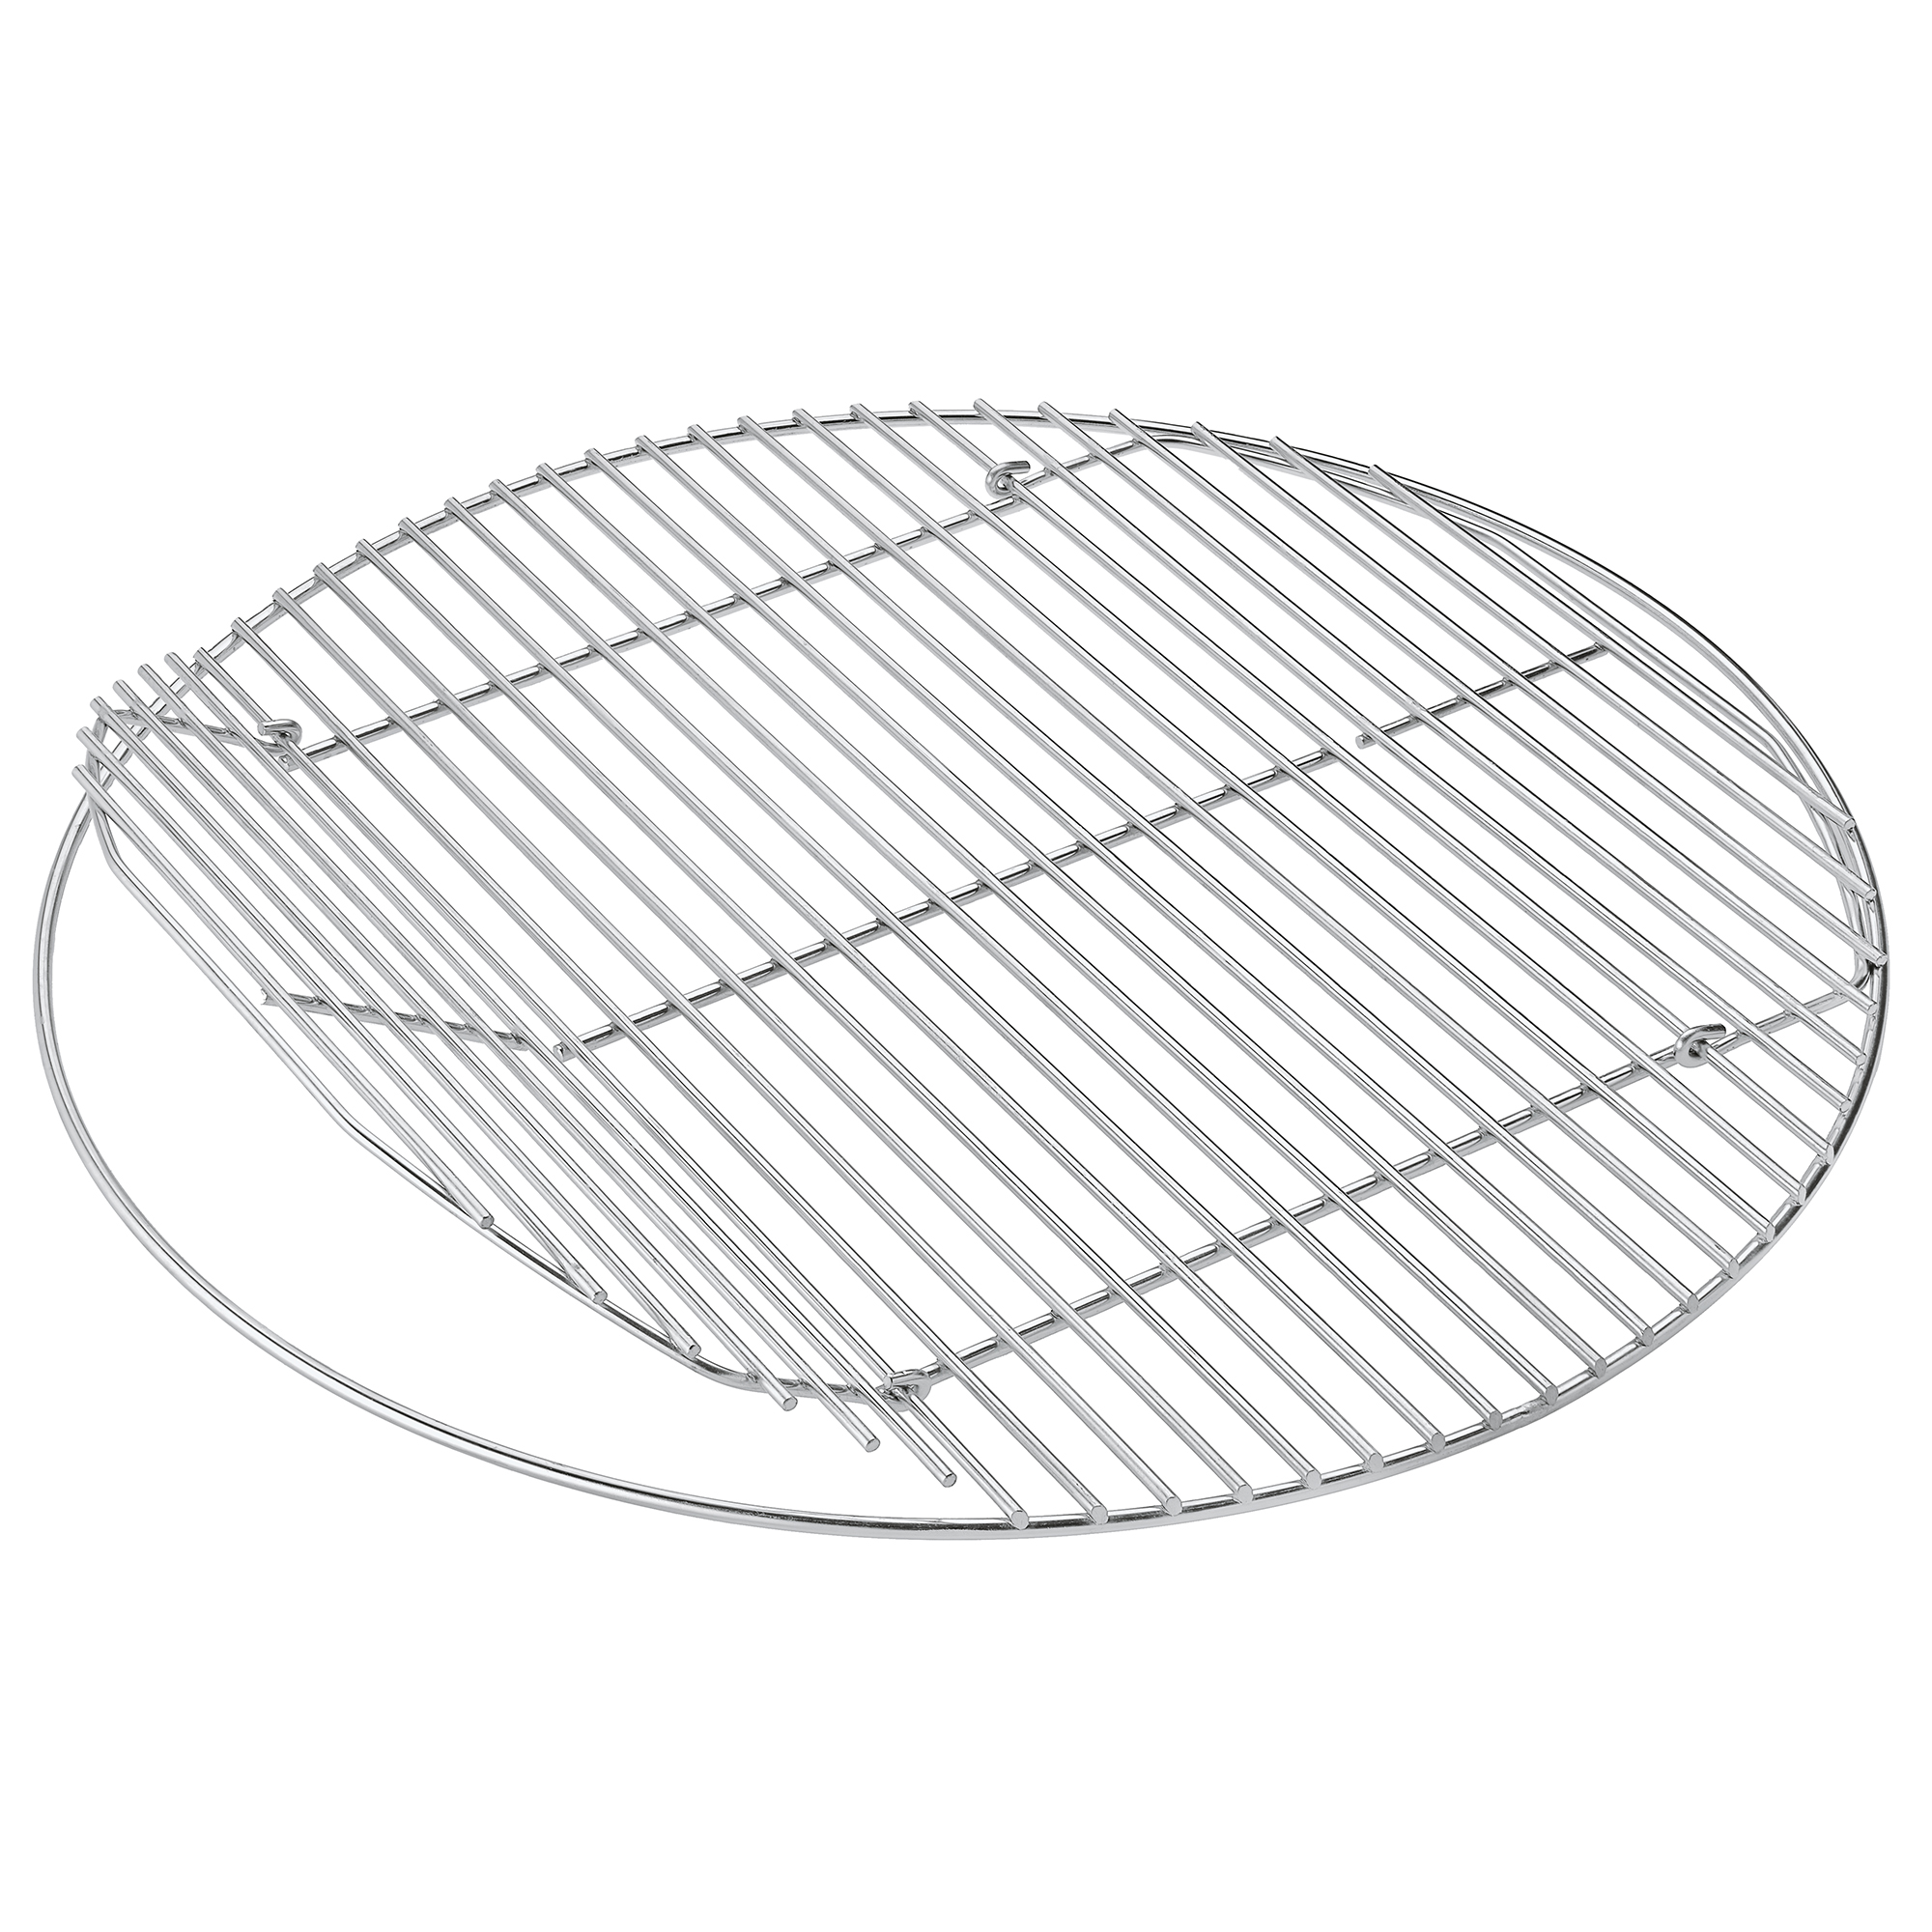 Grilling Grate Sport F60 stainless steel 24 in.